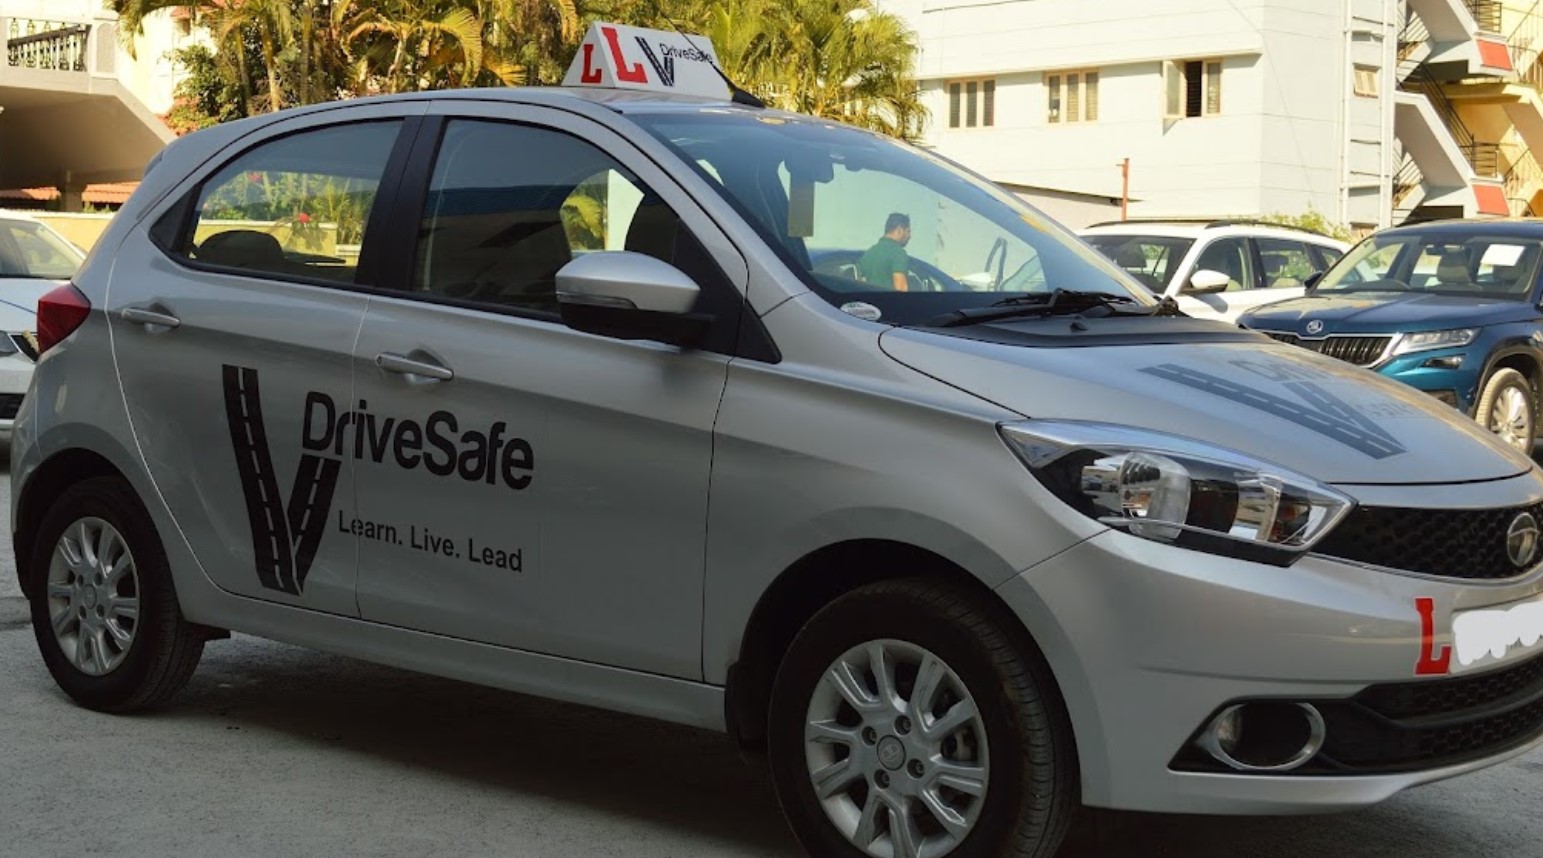 VDrive Safe in Richmond Town